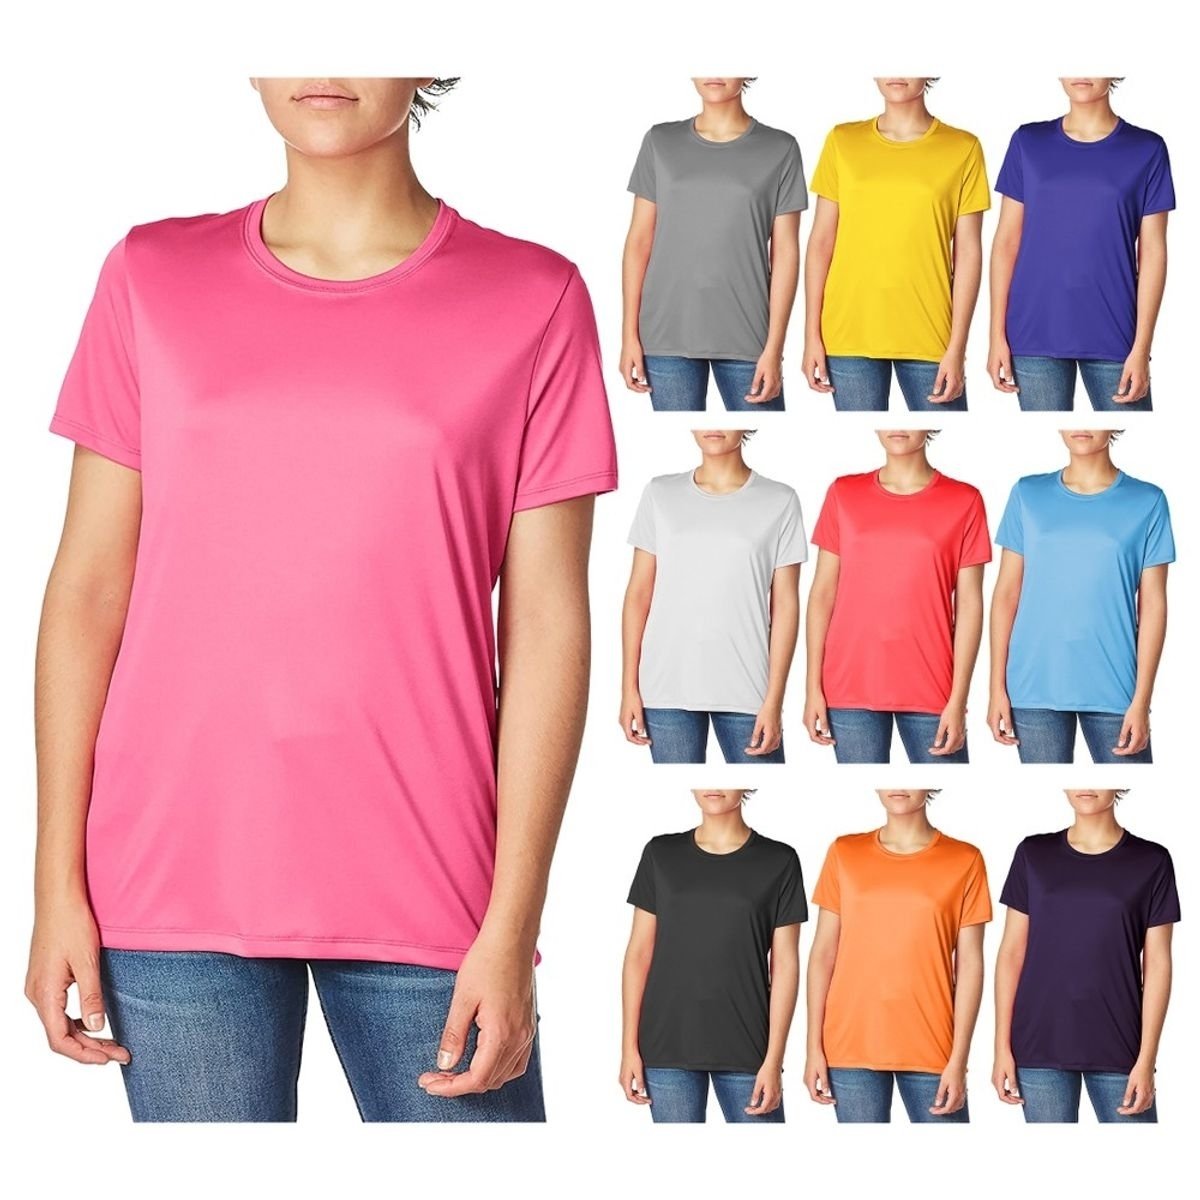 Multi-Pack: Women's Cool Dri-FIt Moisture Wicking Sim-Fit Long Sleeve Crew Neck T-Shirts - 3-pack, Small